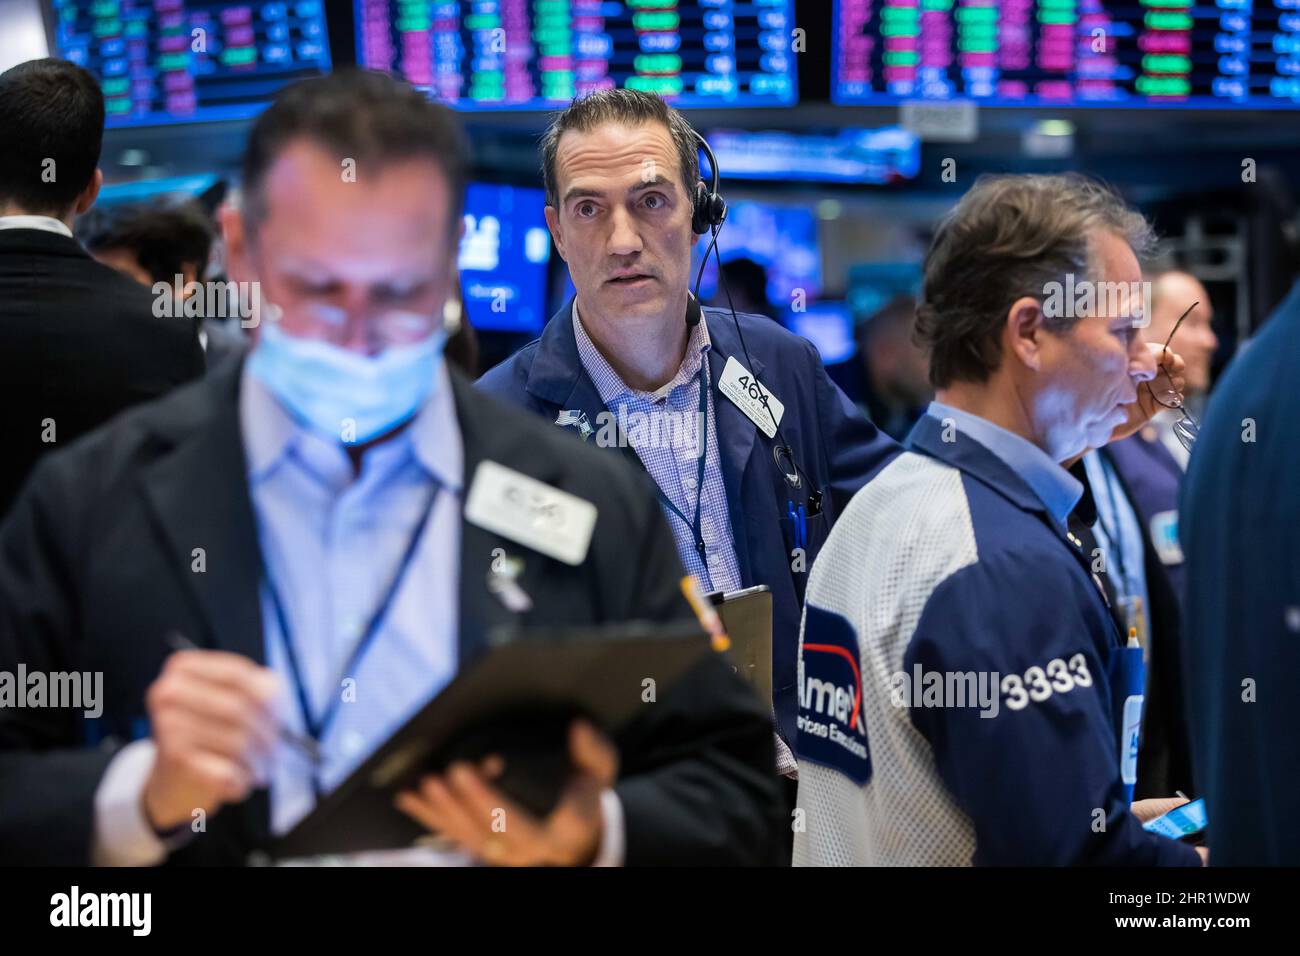 (220224) -- NEW YORK, Feb. 24, 2022 (Xinhua) -- Traders work at the New York Stock Exchange in New York, the United States, Feb. 24, 2022. U.S. stocks finished higher on Thursday, reversing the massive losses earlier in the session, as investors assessed the geopolitical tensions over Ukraine. The Dow Jones Industrial Average rose 92.07 points, or 0.28 percent, to 33,223.83. The S&P 500 climbed 63.20 points, or 1.50 percent, to 4,288.70. The Nasdaq Composite Index increased 436.09 points, or 3.34 percent, to 13,473.58. Credit: Xinhua/Alamy Live News Stock Photo